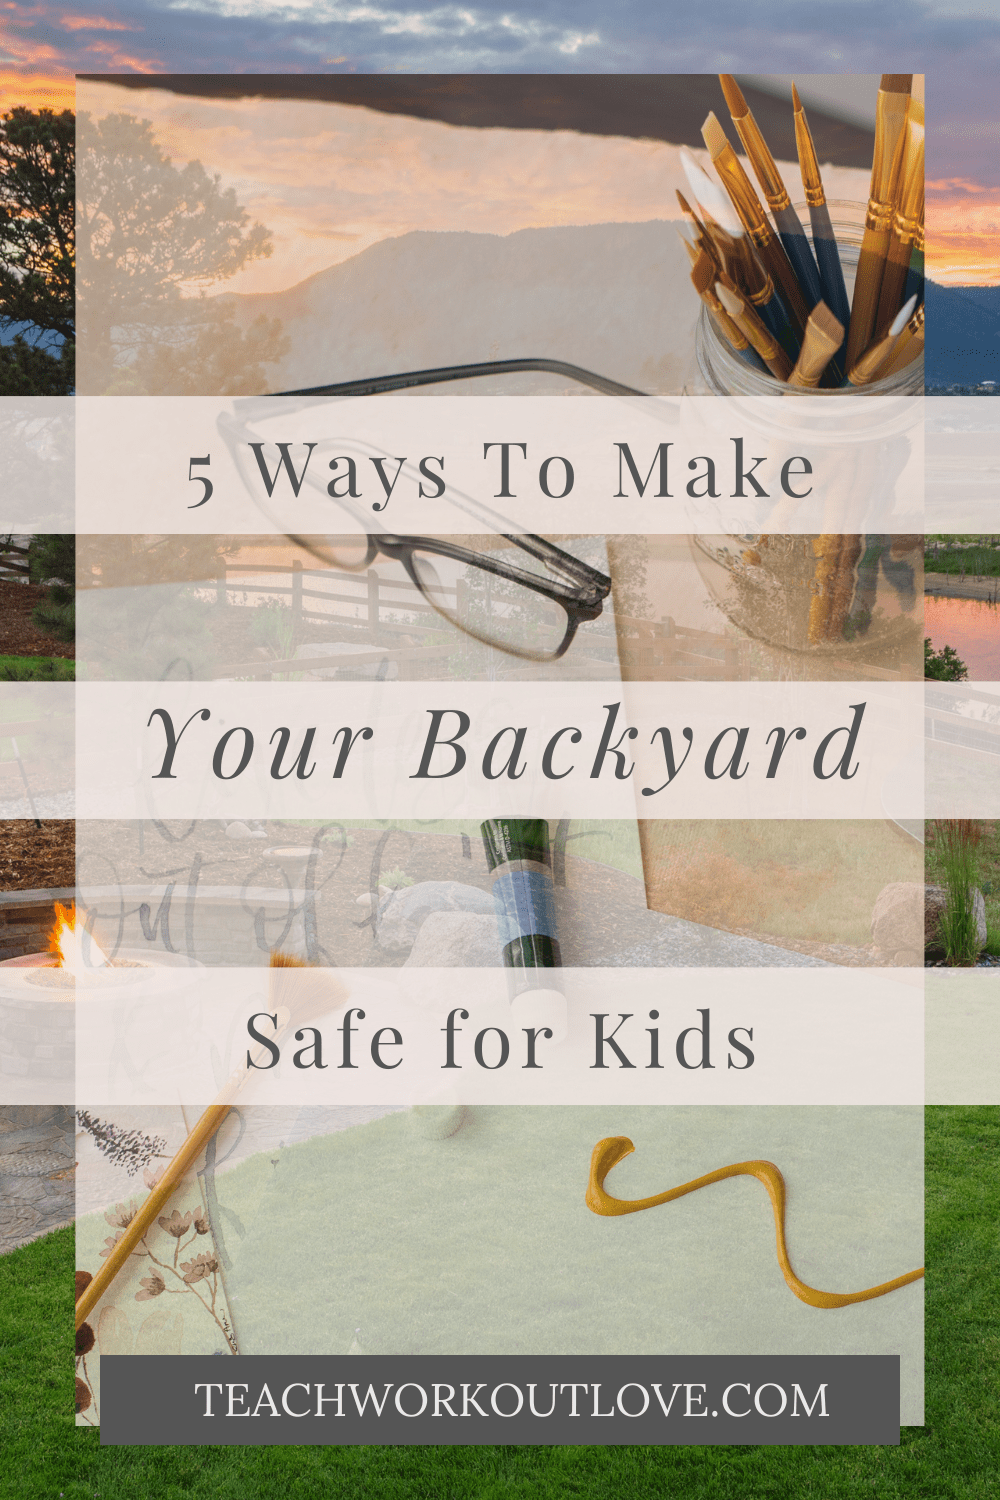 Do you find yourself worrying about their safety out in your backyard? Here's some reasonable measures you can take to increase their safety.